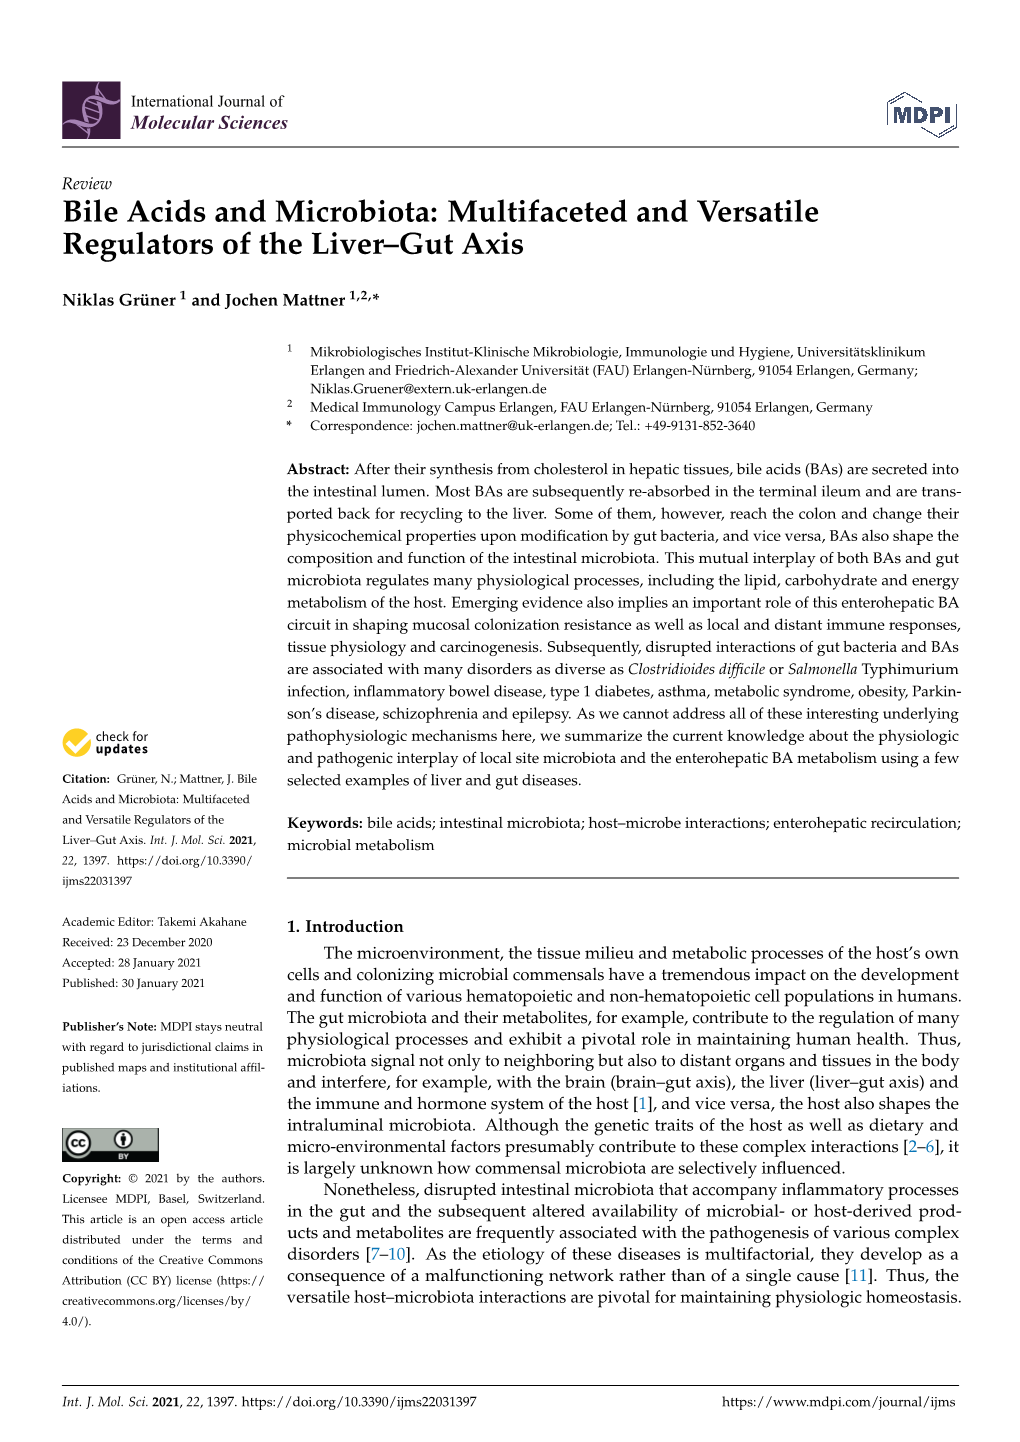 Bile Acids and Microbiota: Multifaceted and Versatile Regulators of the Liver–Gut Axis